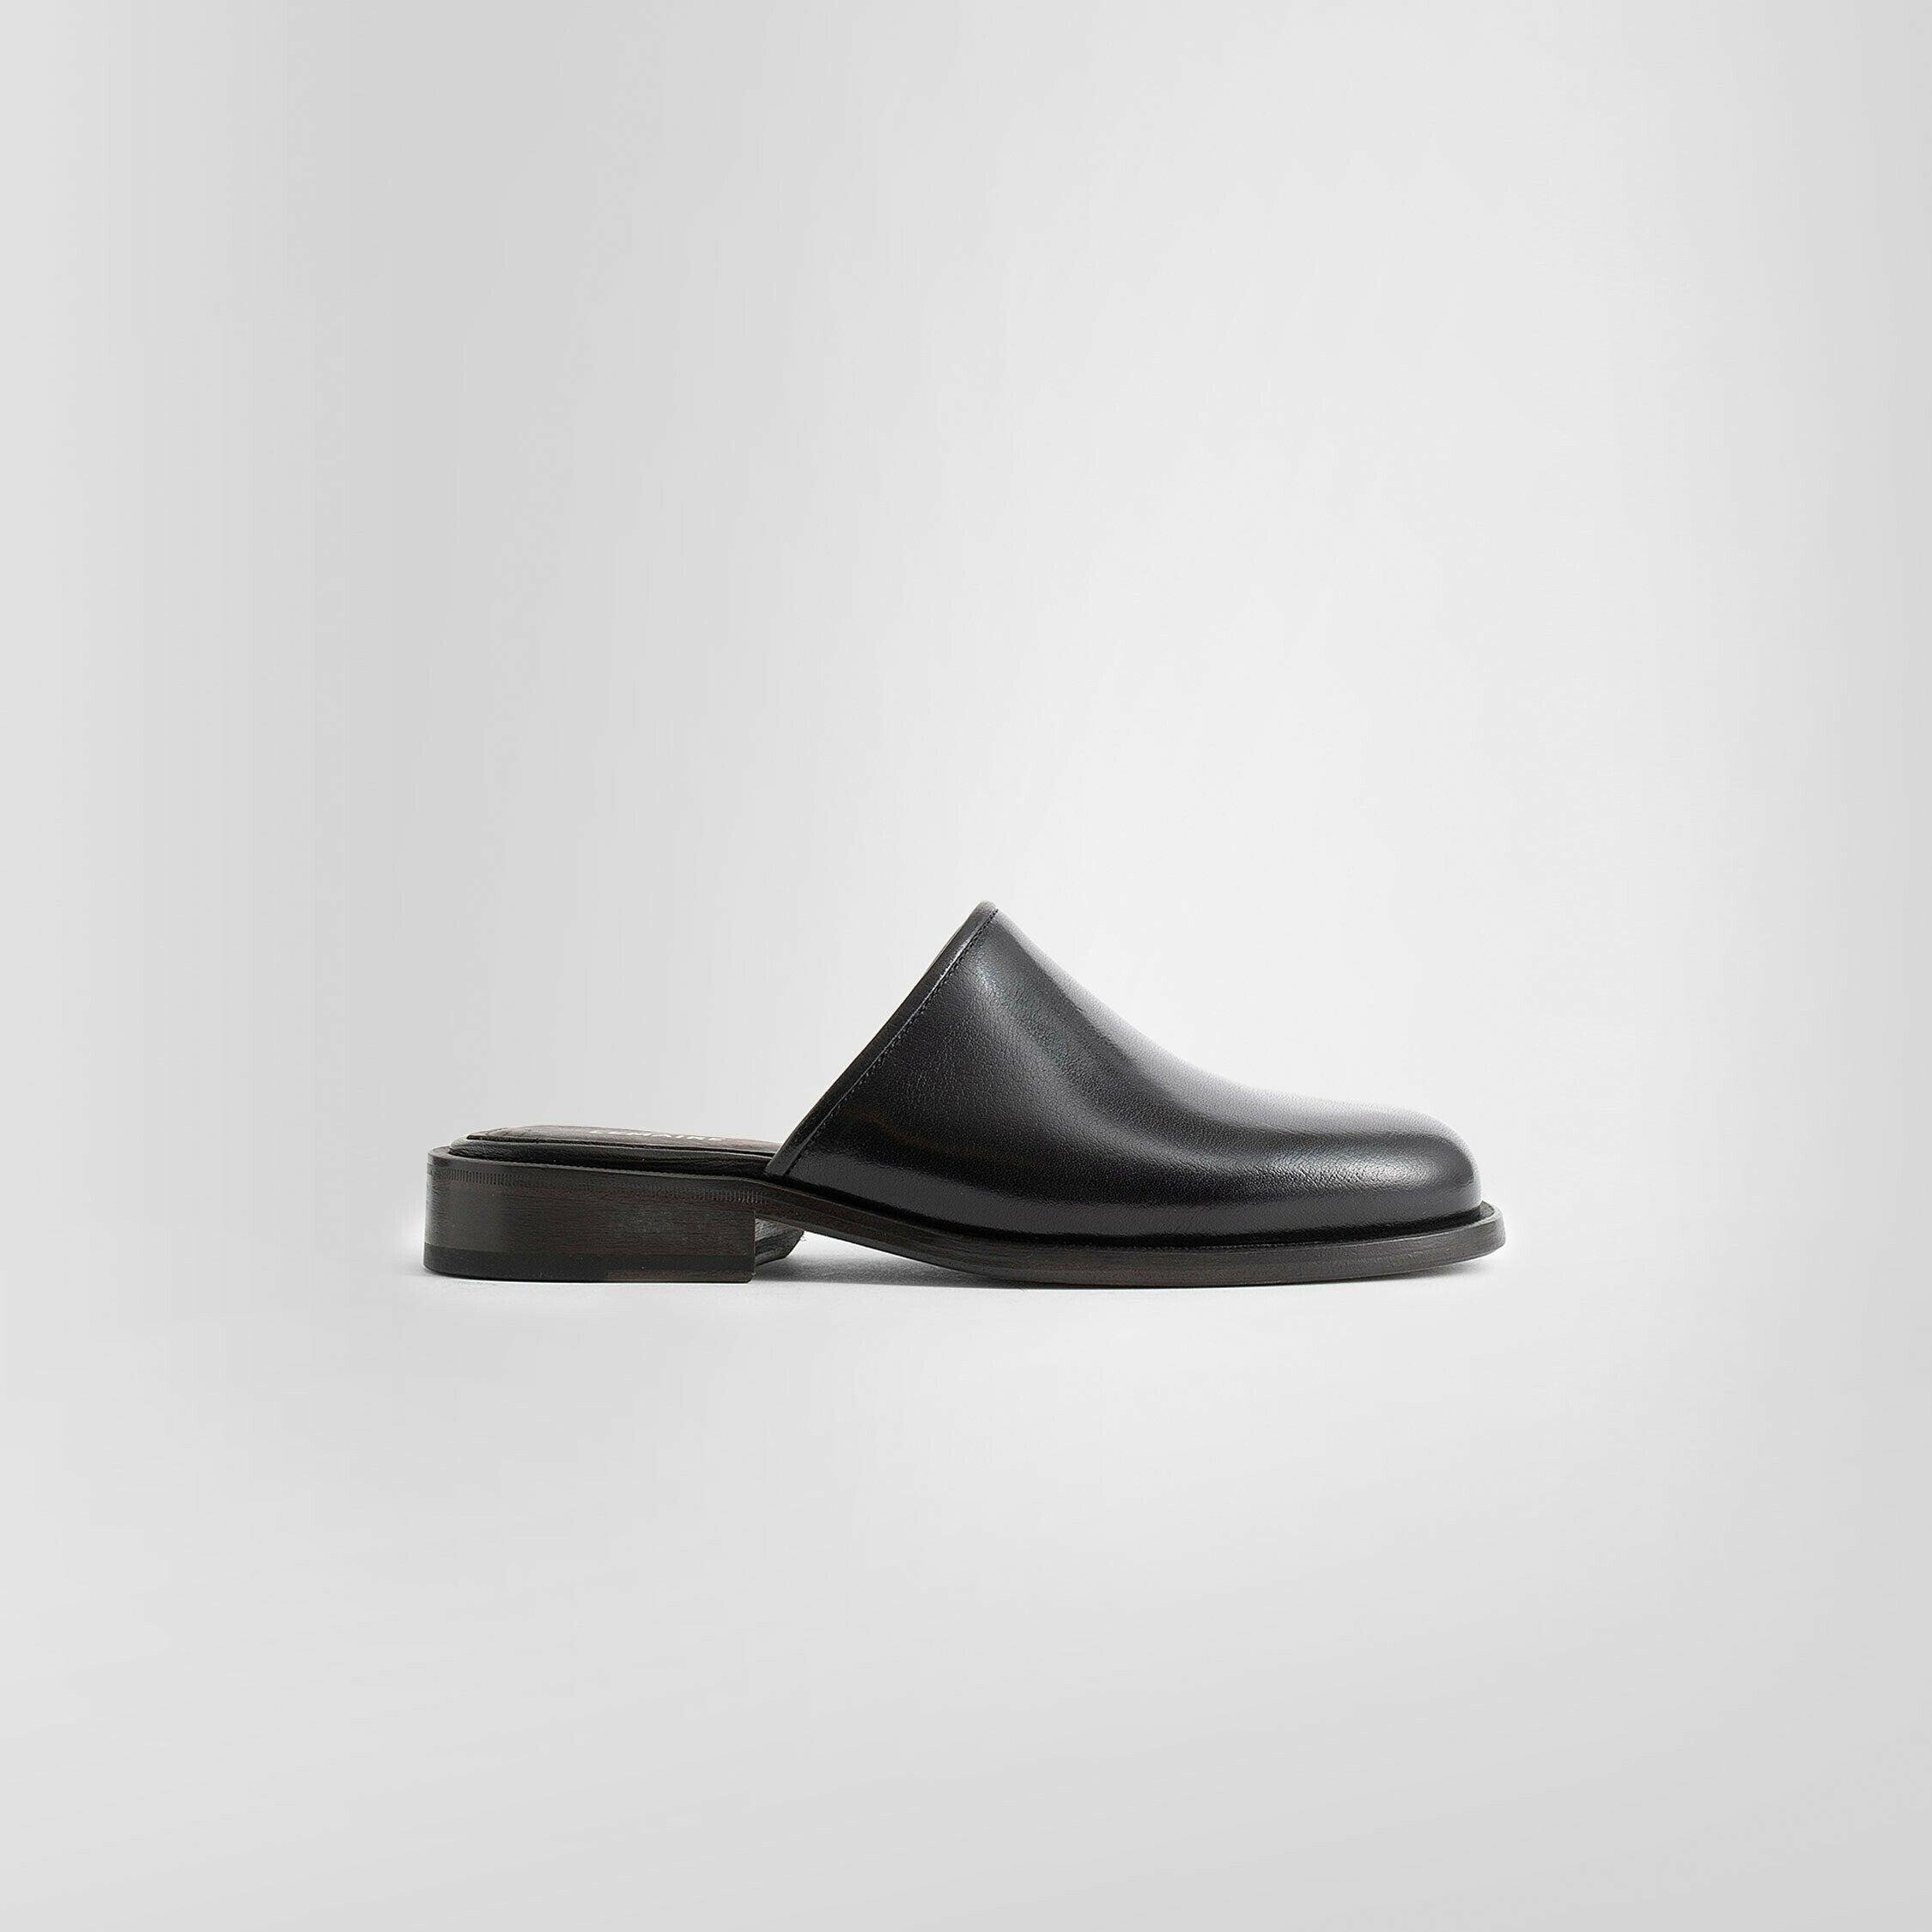 LEMAIRE MAN BLACK FLATS by LEMAIRE